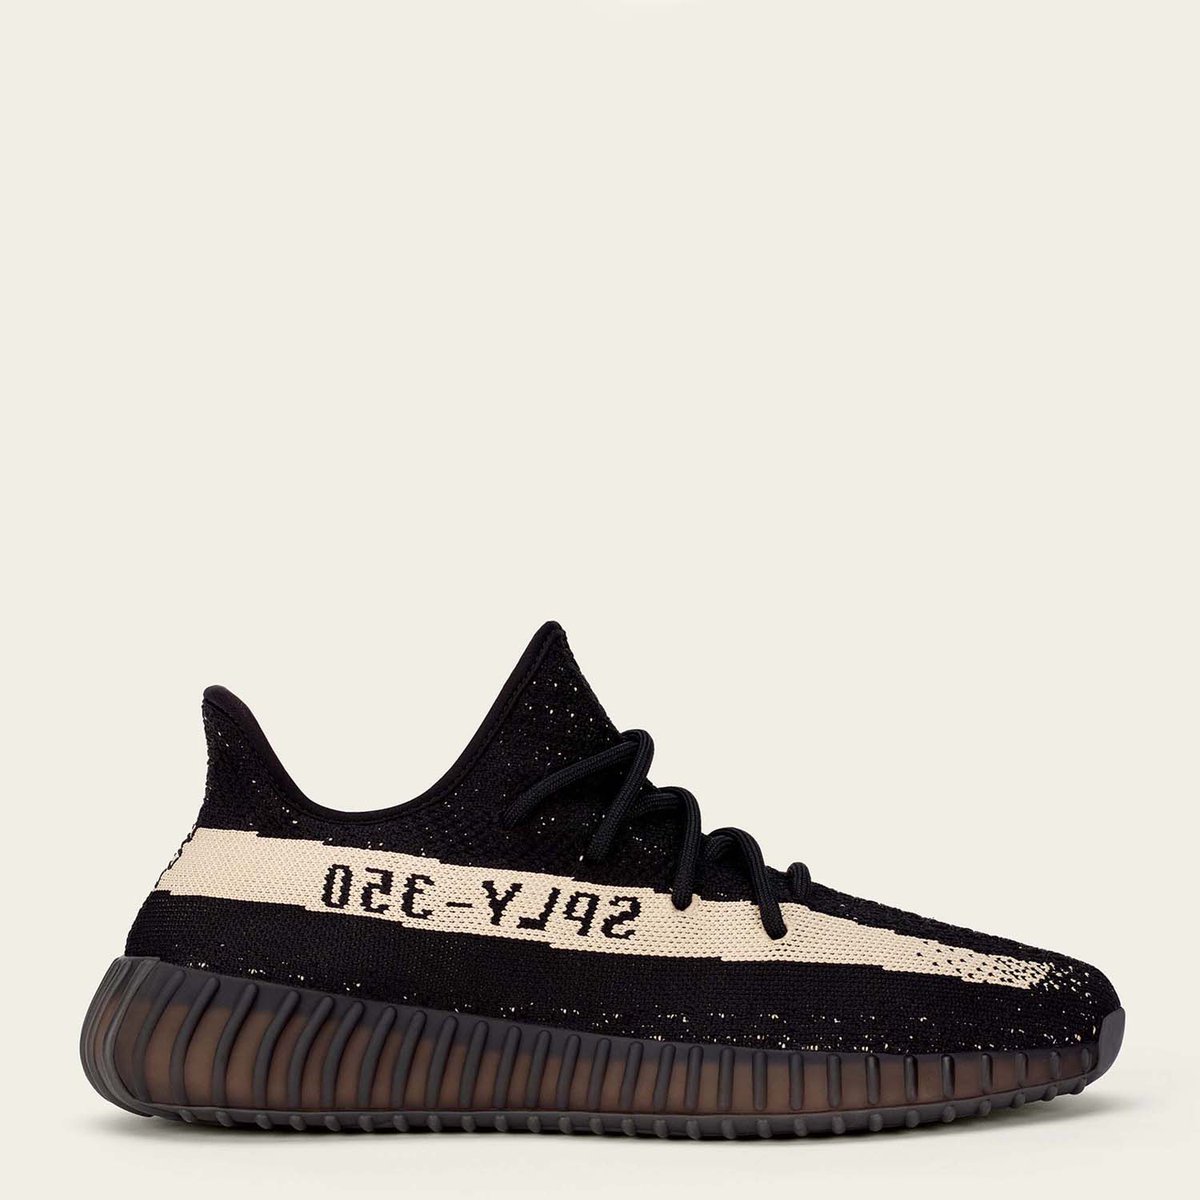 yeezy limited release